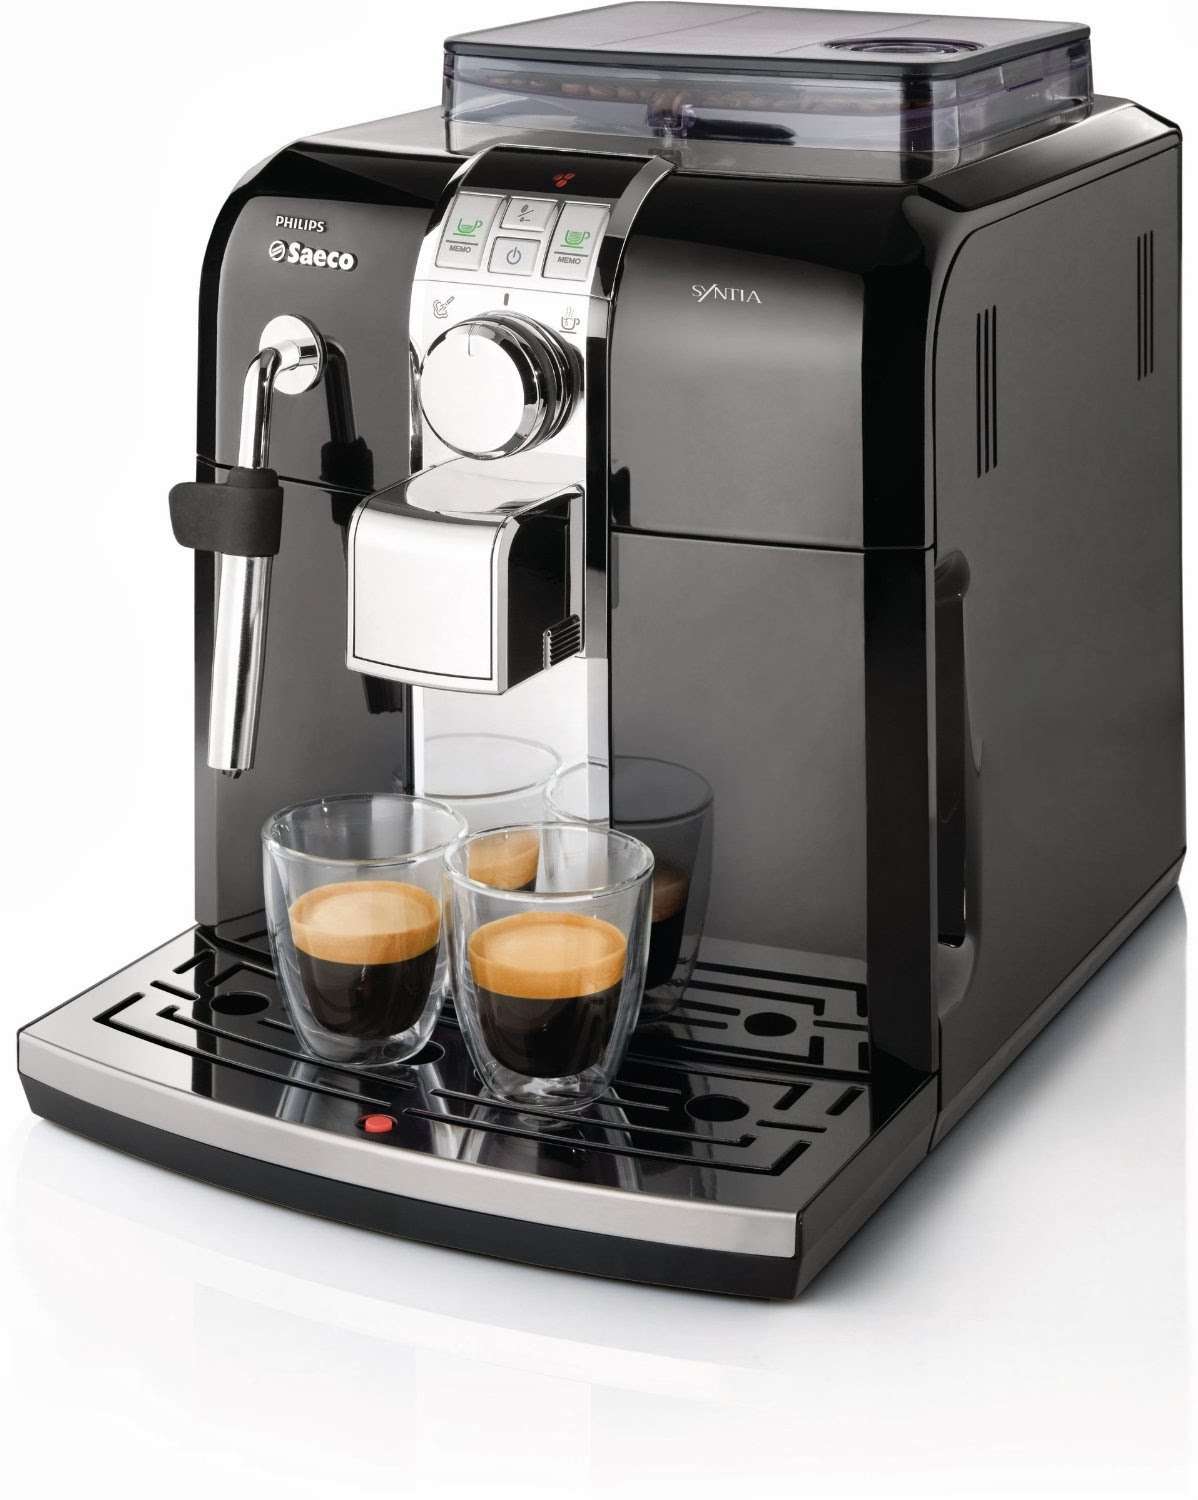 The Best Office Coffee Machine For Your Business